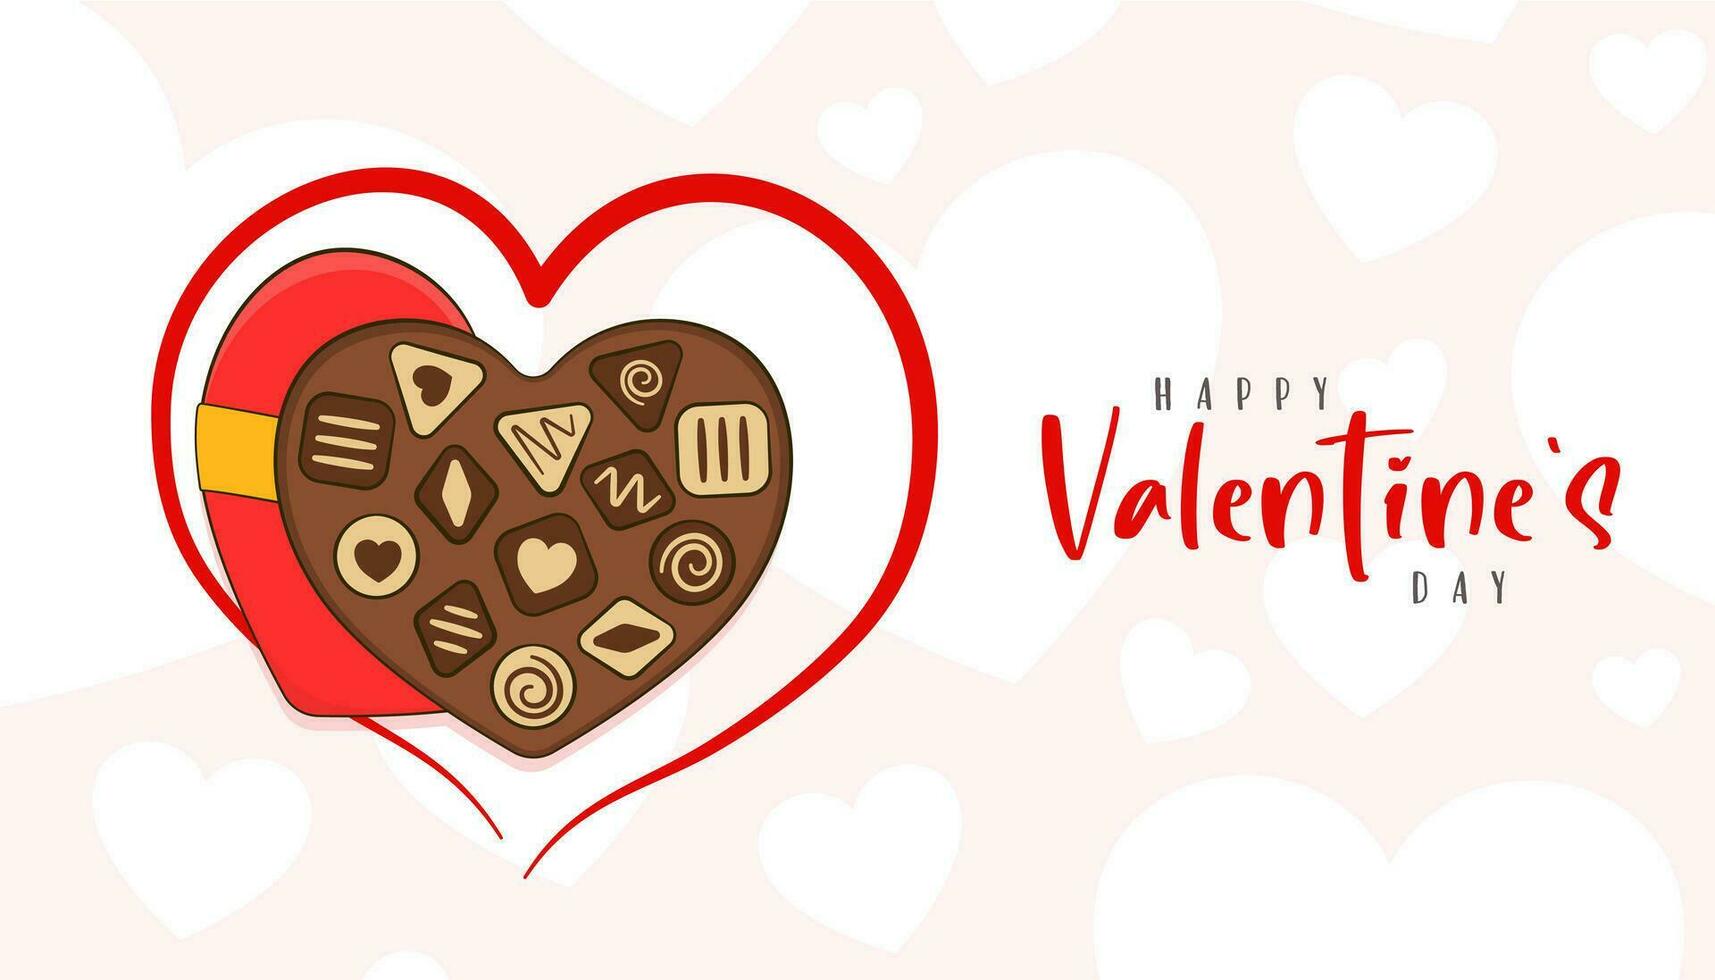 Happy Valentine's Day lettering. Greeting card. Chocolate candy with heart-shaped box vector